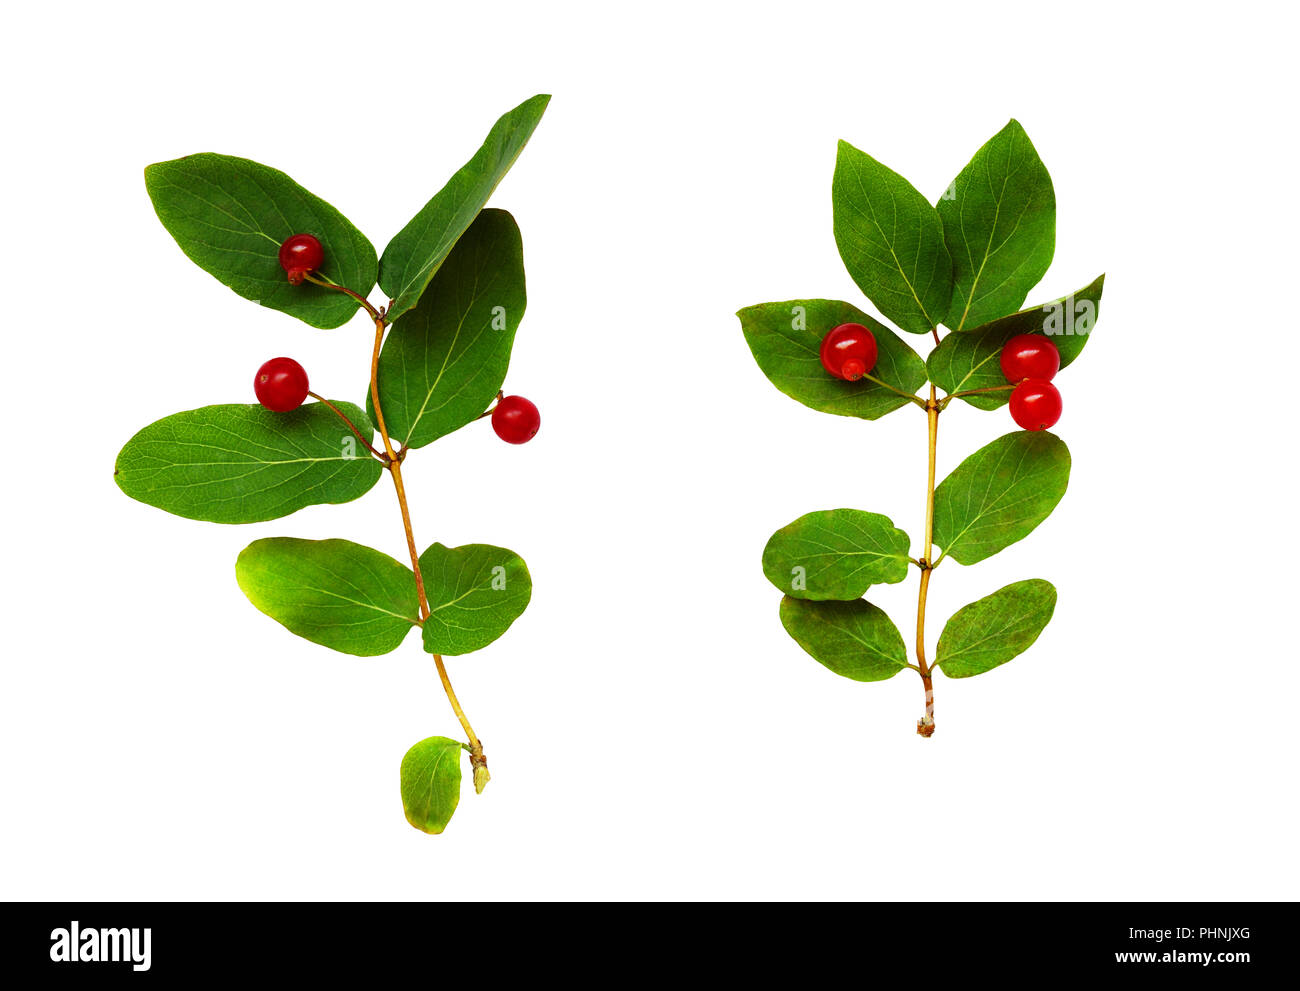 Set of Lonicera tatarica twigs with green leaves and red berries isolated on white Stock Photo